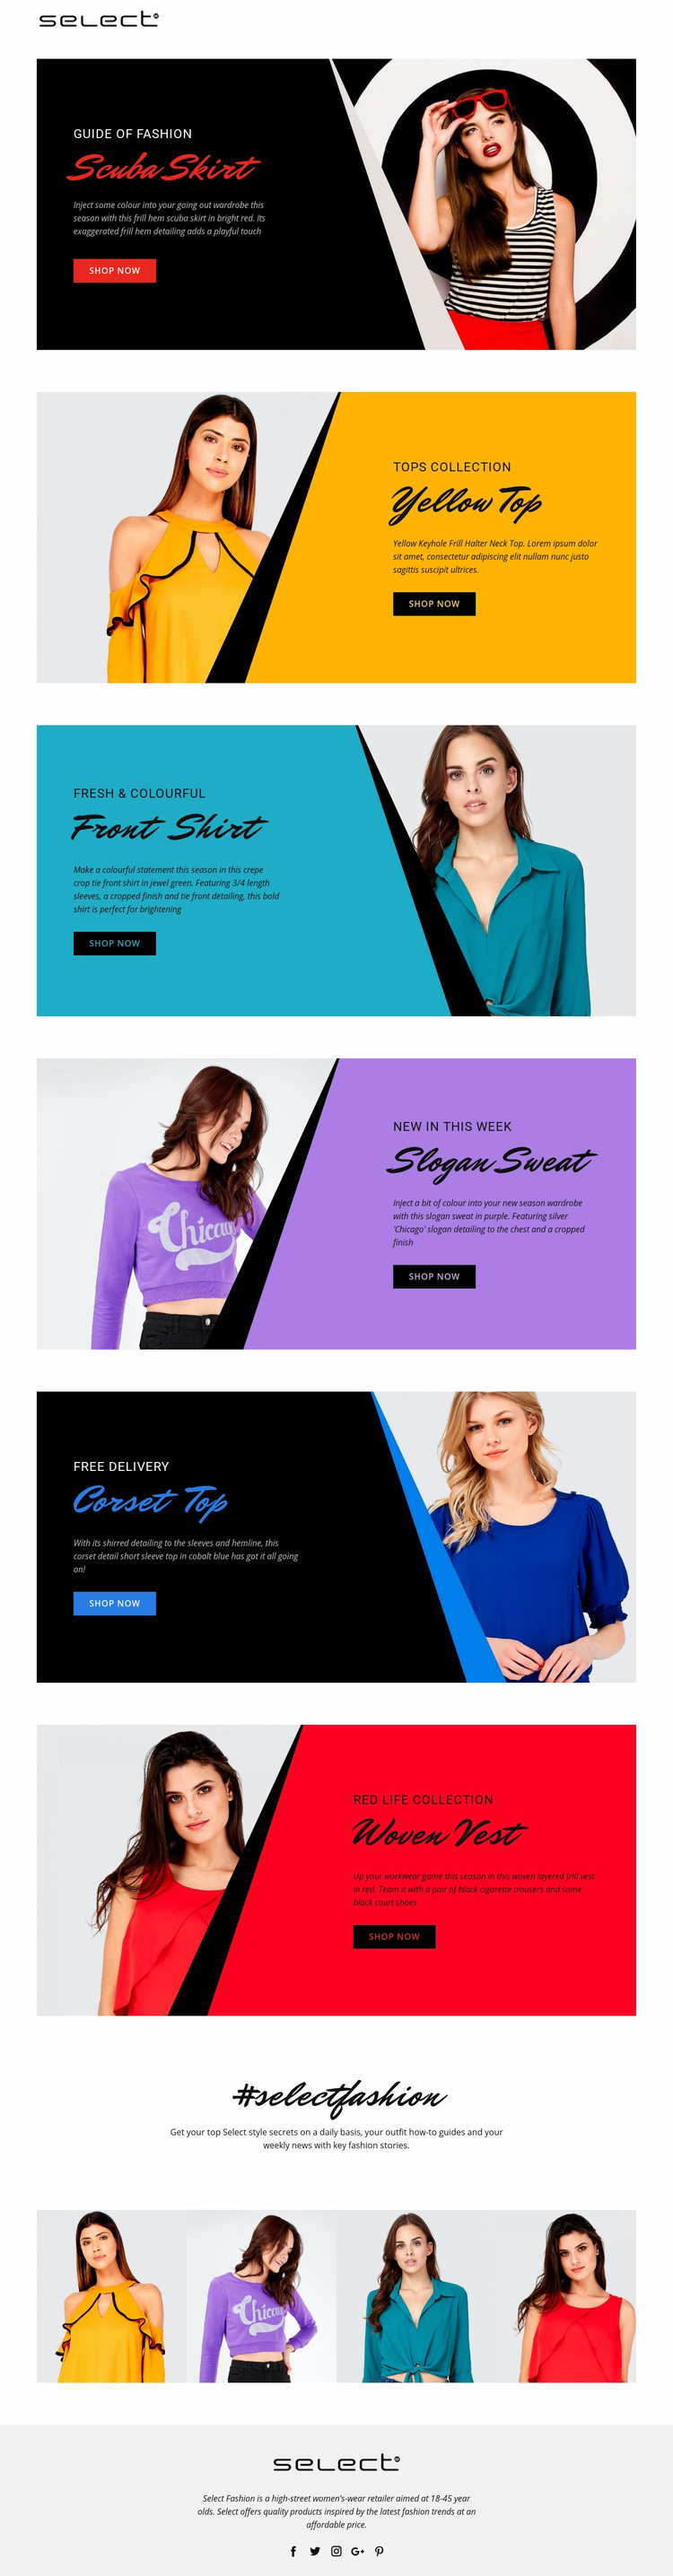 Learn about dress codes Web Page Designer